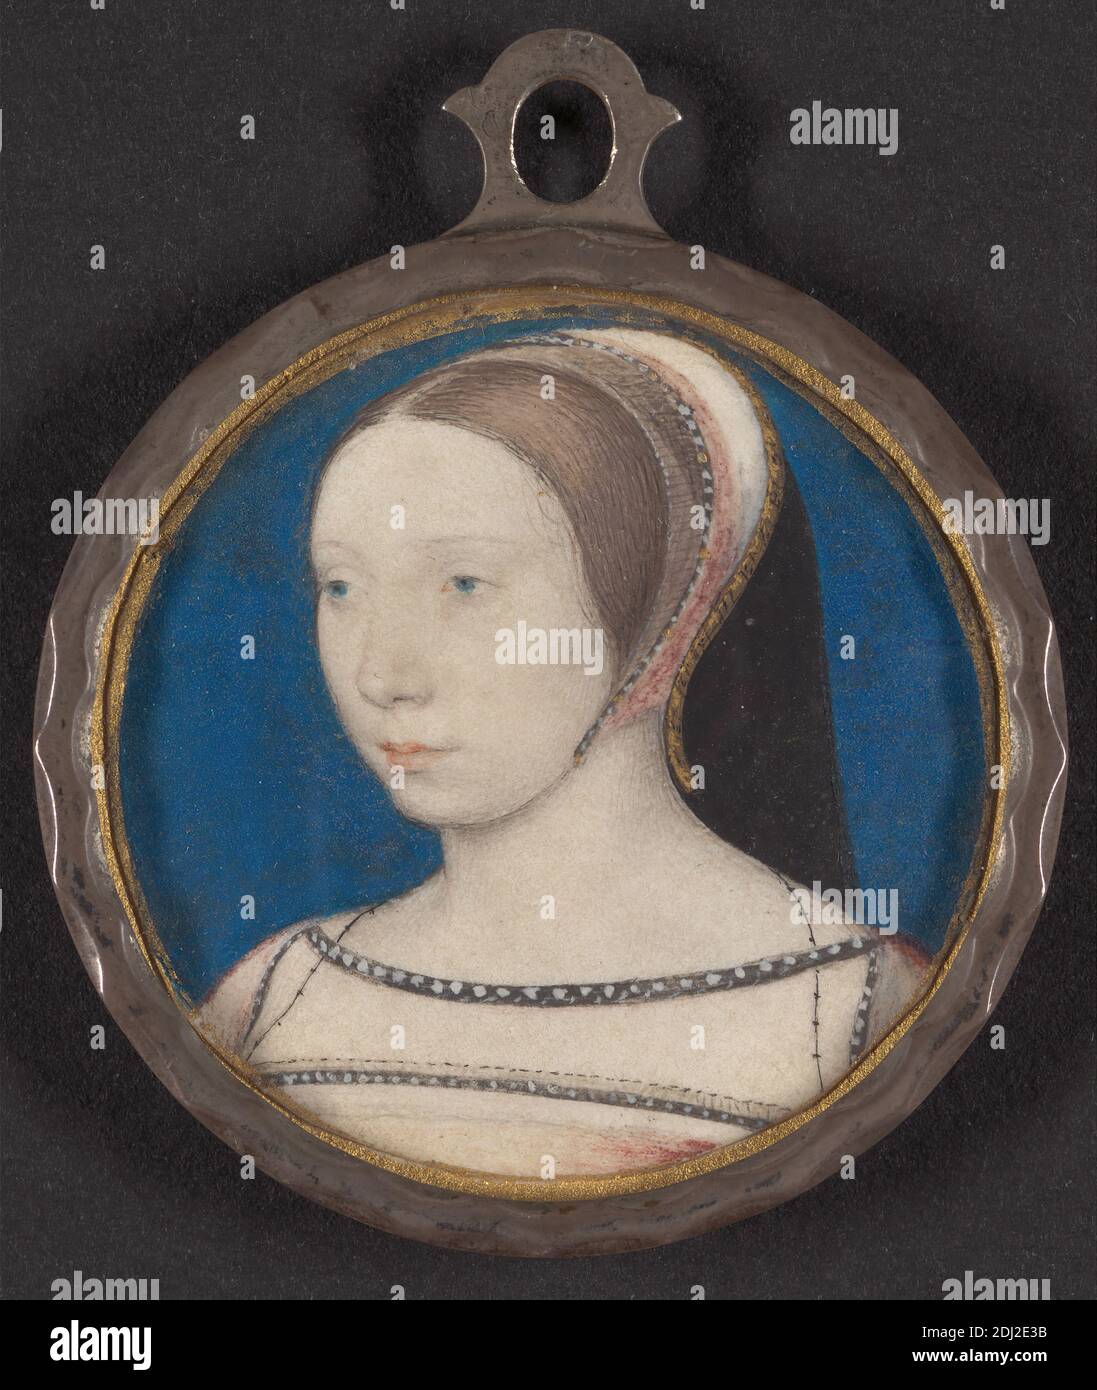 Portrait of a Lady, Jean Clouet, ca. 1485–1540/41, Netherlandish, Formerly attributed to Hans Holbein the Younger, ca. 1497–1543, German, active in Switzerland and England, ca. 1530, Watercolor and gouache and gold on vellum, Sheet: 1 5/8 x 1 5/8 inches (4.1 x 4.1 cm) and Frame: 2 1/8 x 1 3/4 x 1/4 inches (5.4 x 4.4 x 0.6 cm), portrait Stock Photo